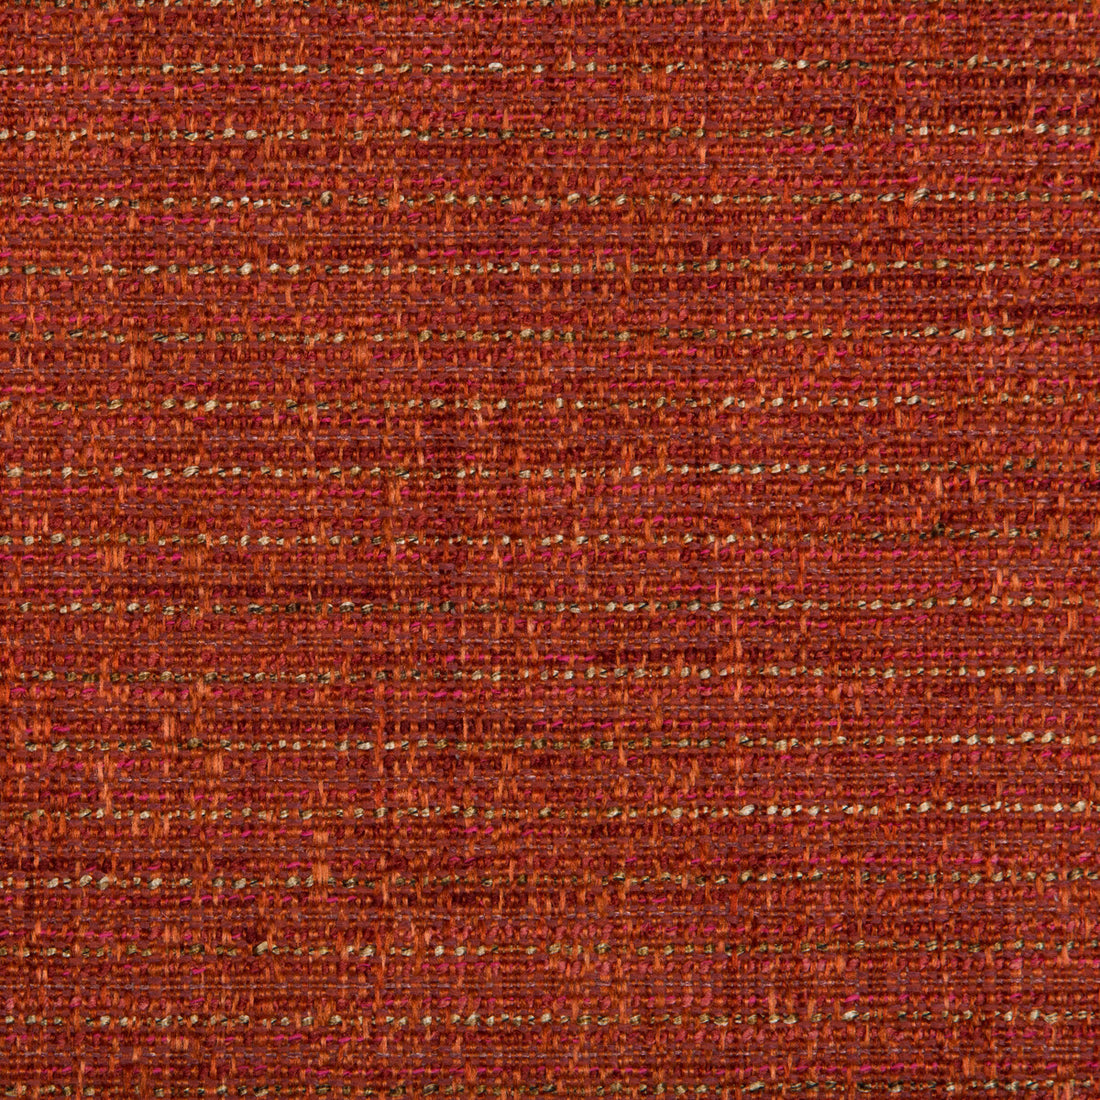 Kravet Smart fabric in 35396-24 color - pattern 35396.24.0 - by Kravet Smart in the Performance Crypton Home collection